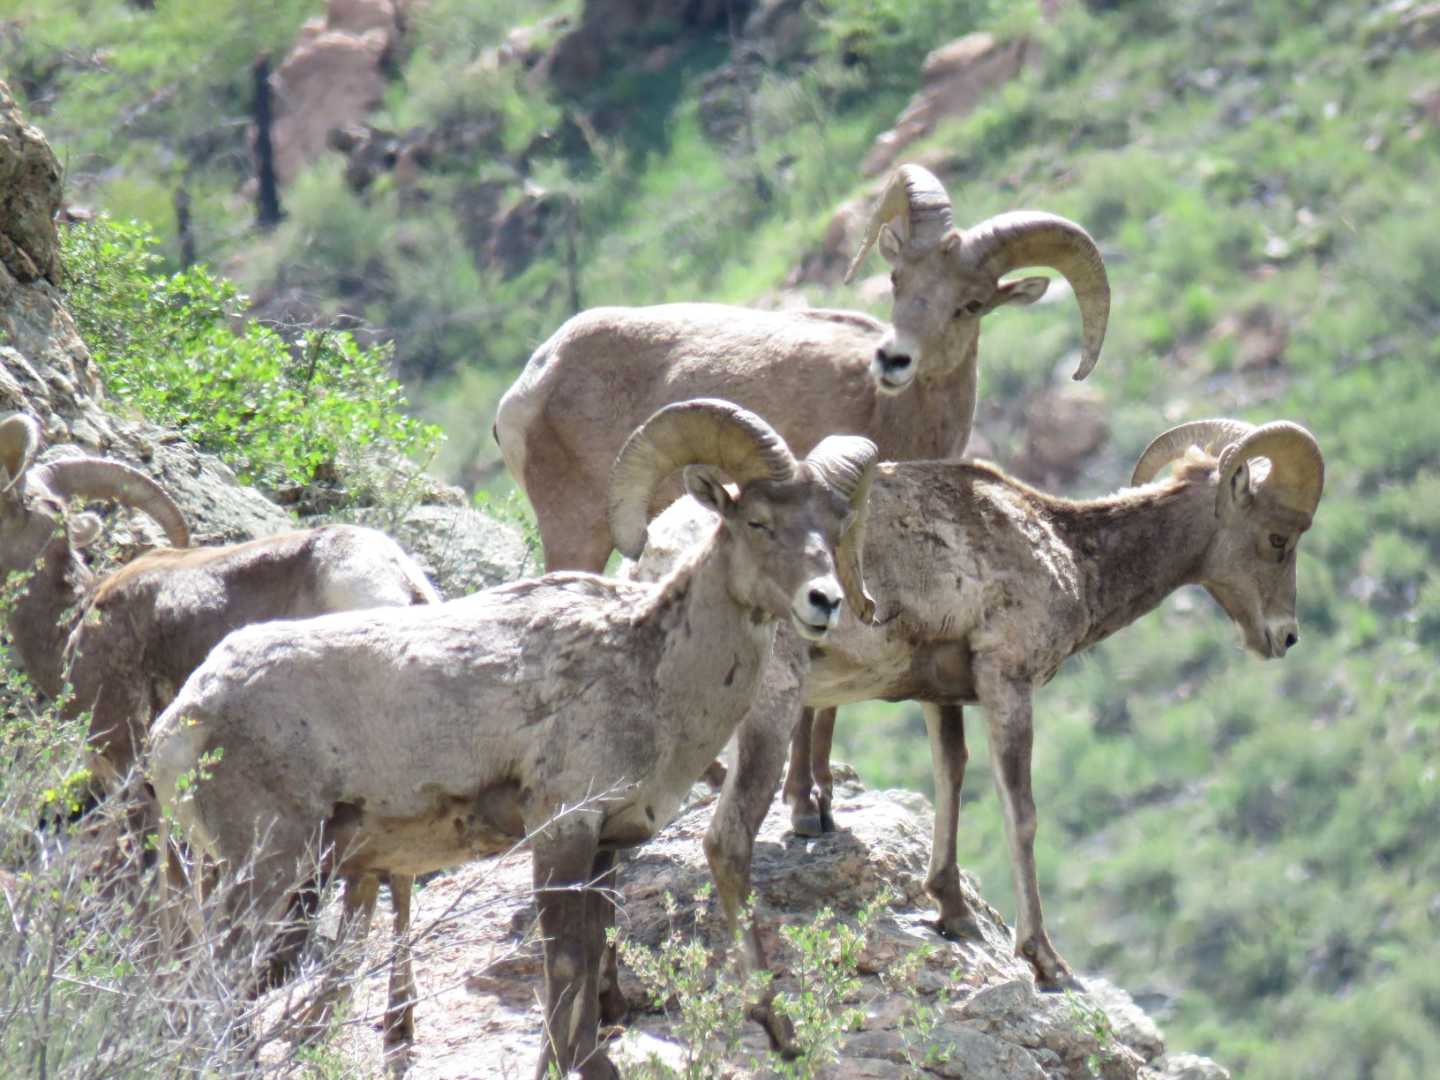 Cache La Poudre Whitewater rafting offers the chance to see bighorn sheep